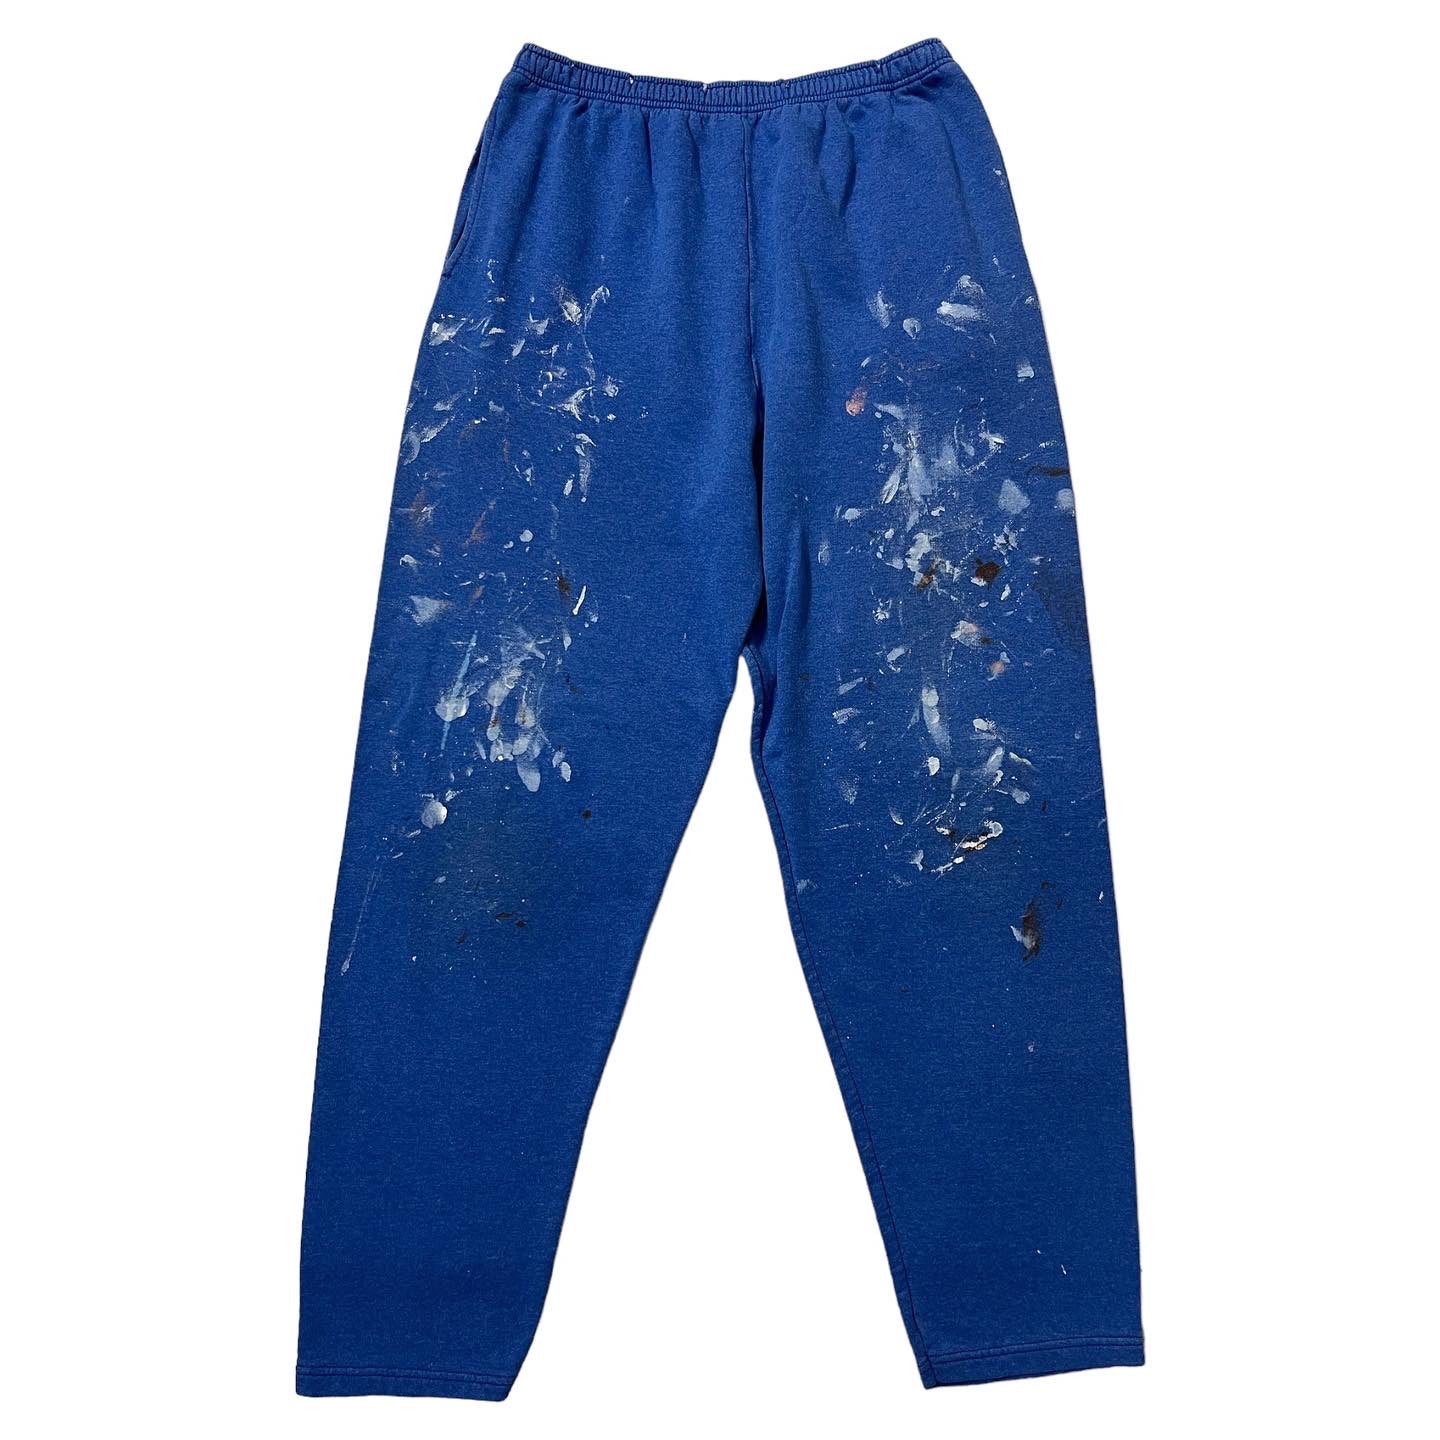 90s Fruit of the Loom ‘Just for Her’ Painter Sweatpants - Cornflower Blue - S/M